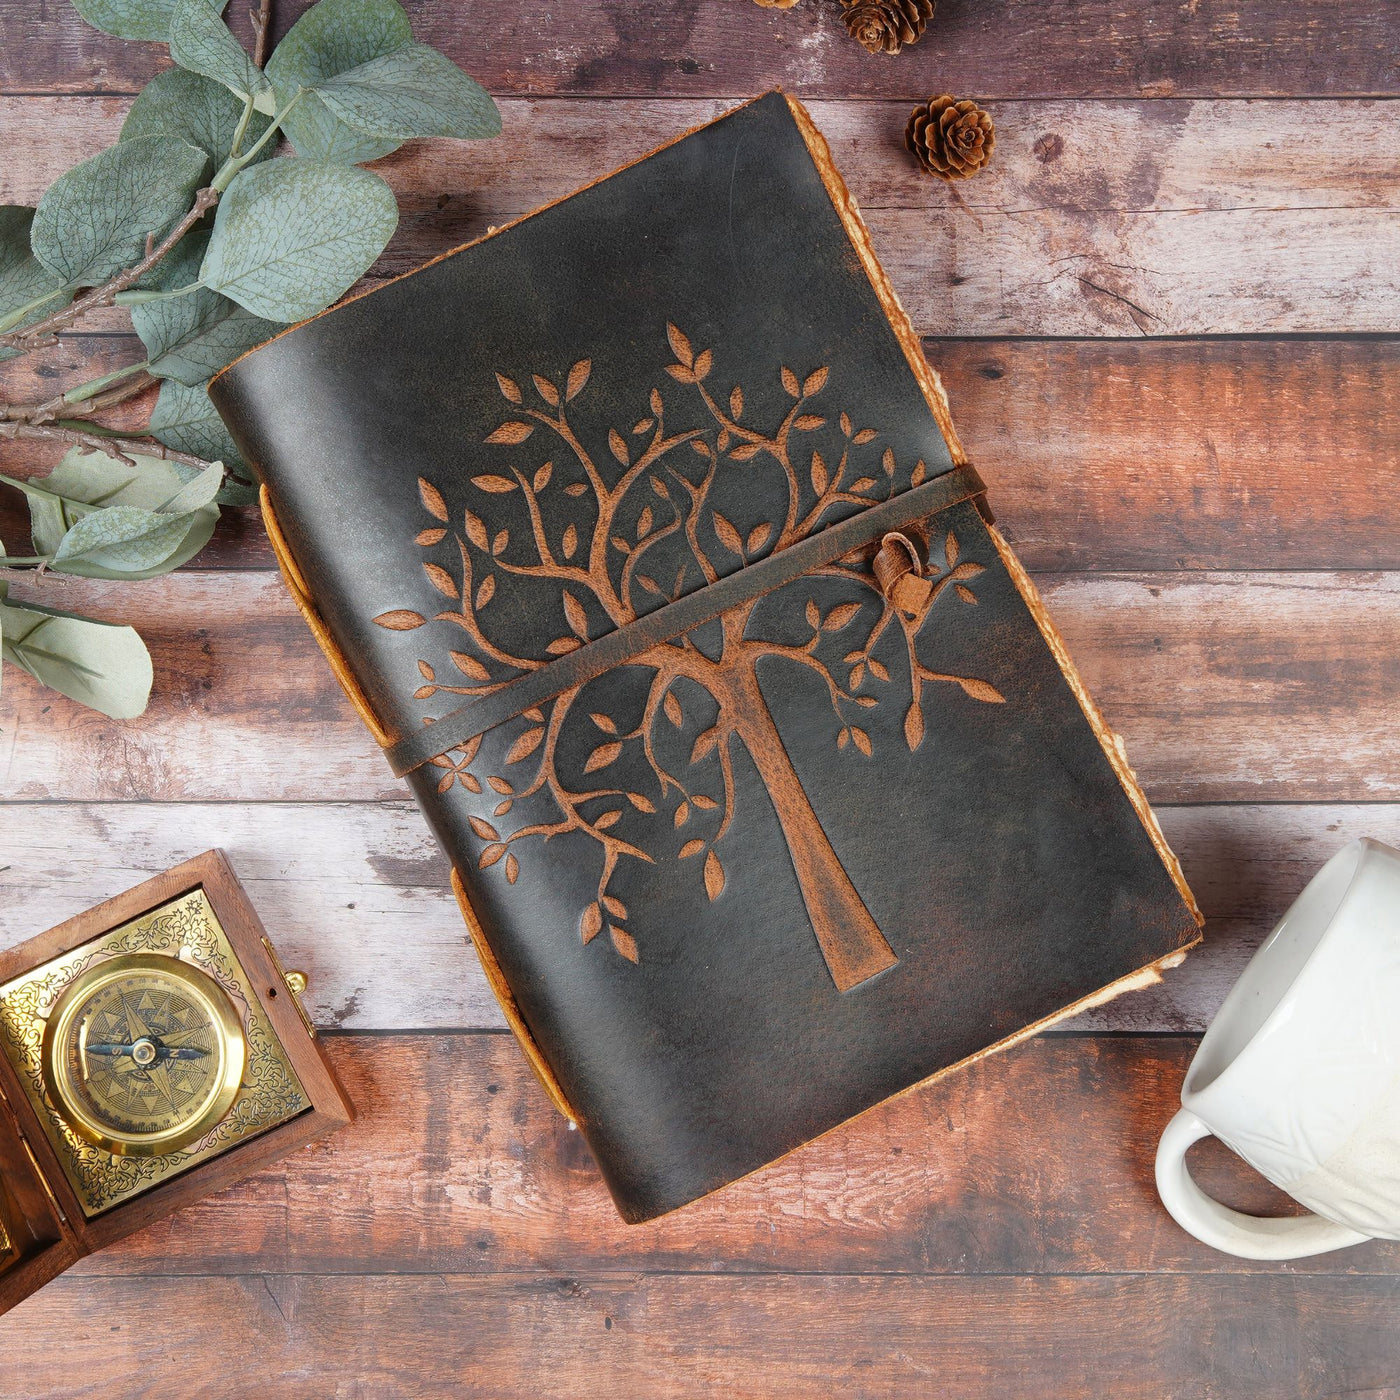 Tree of Life Leather Journal - Antique Handmade Deckle Edge Vintage Paper Leather Print Bound Journal - Book of Shadows Journal - Leather Sketchbook